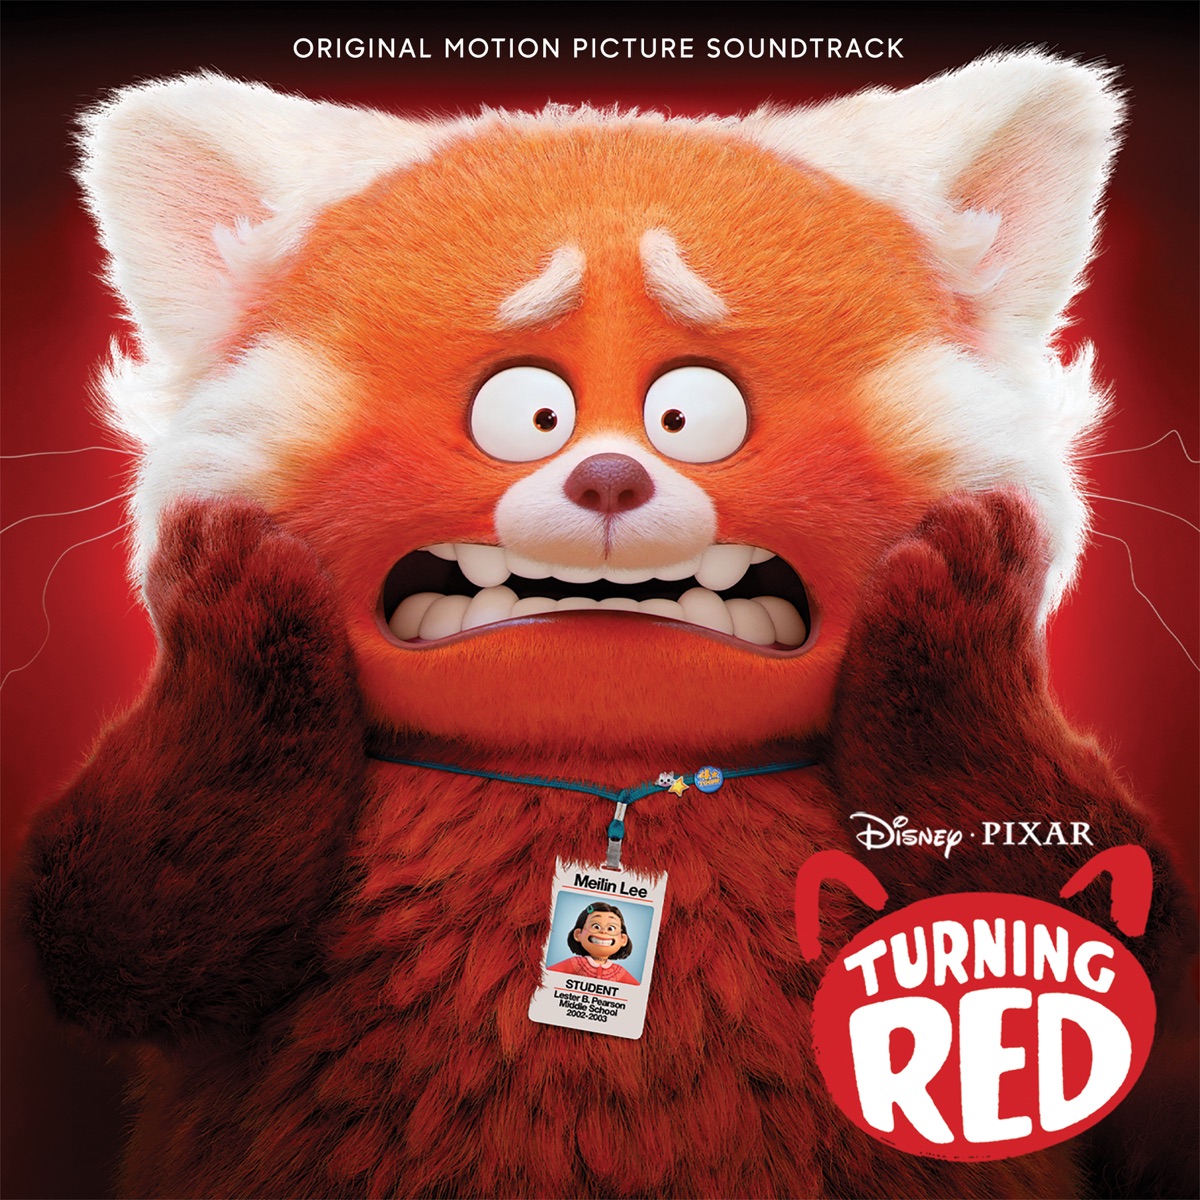 『4☆Town - 1 True Love』収録の『Turning Red (Original Motion Picture Soundtrack)』ジャケット